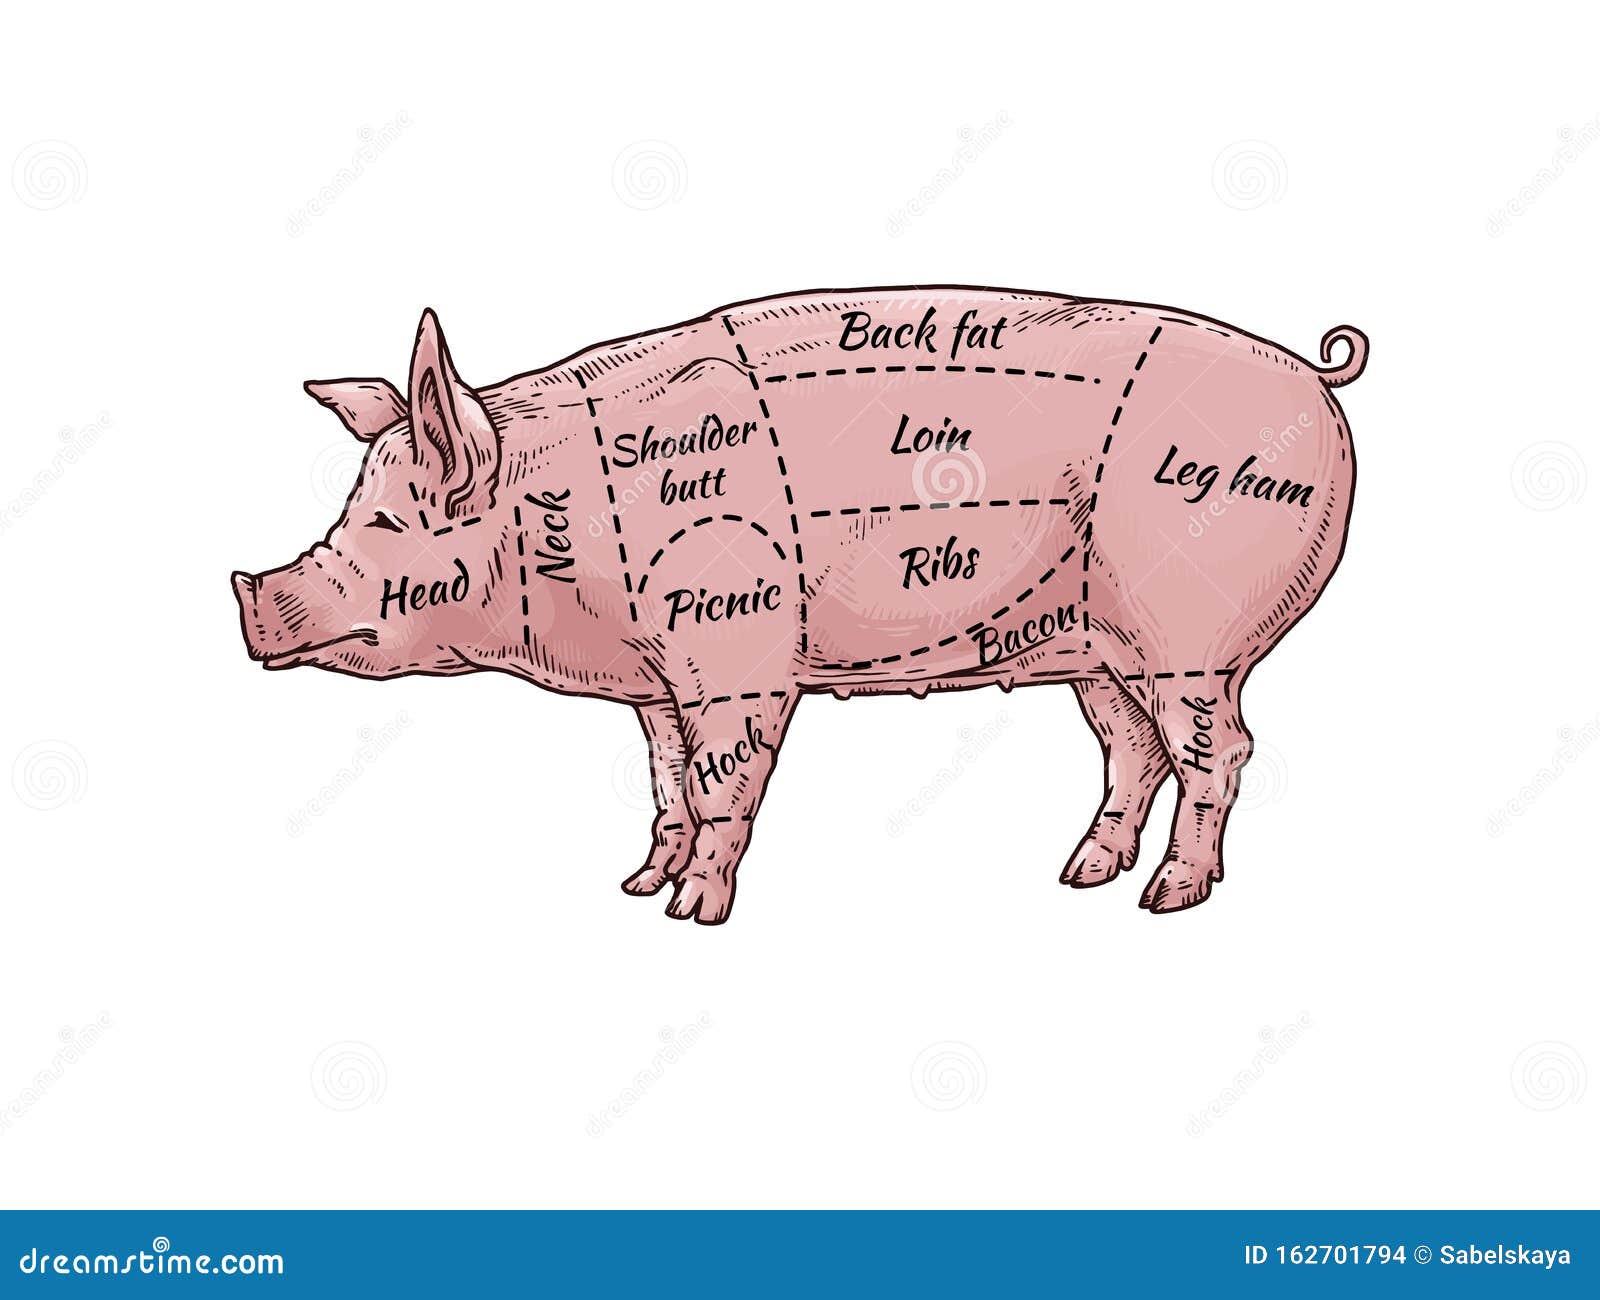 Pig Meat Body Part Guide for Butcher Shop - Hand Drawn Pink Farm Animal  Stock Vector - Illustration of animal, pork: 162701794